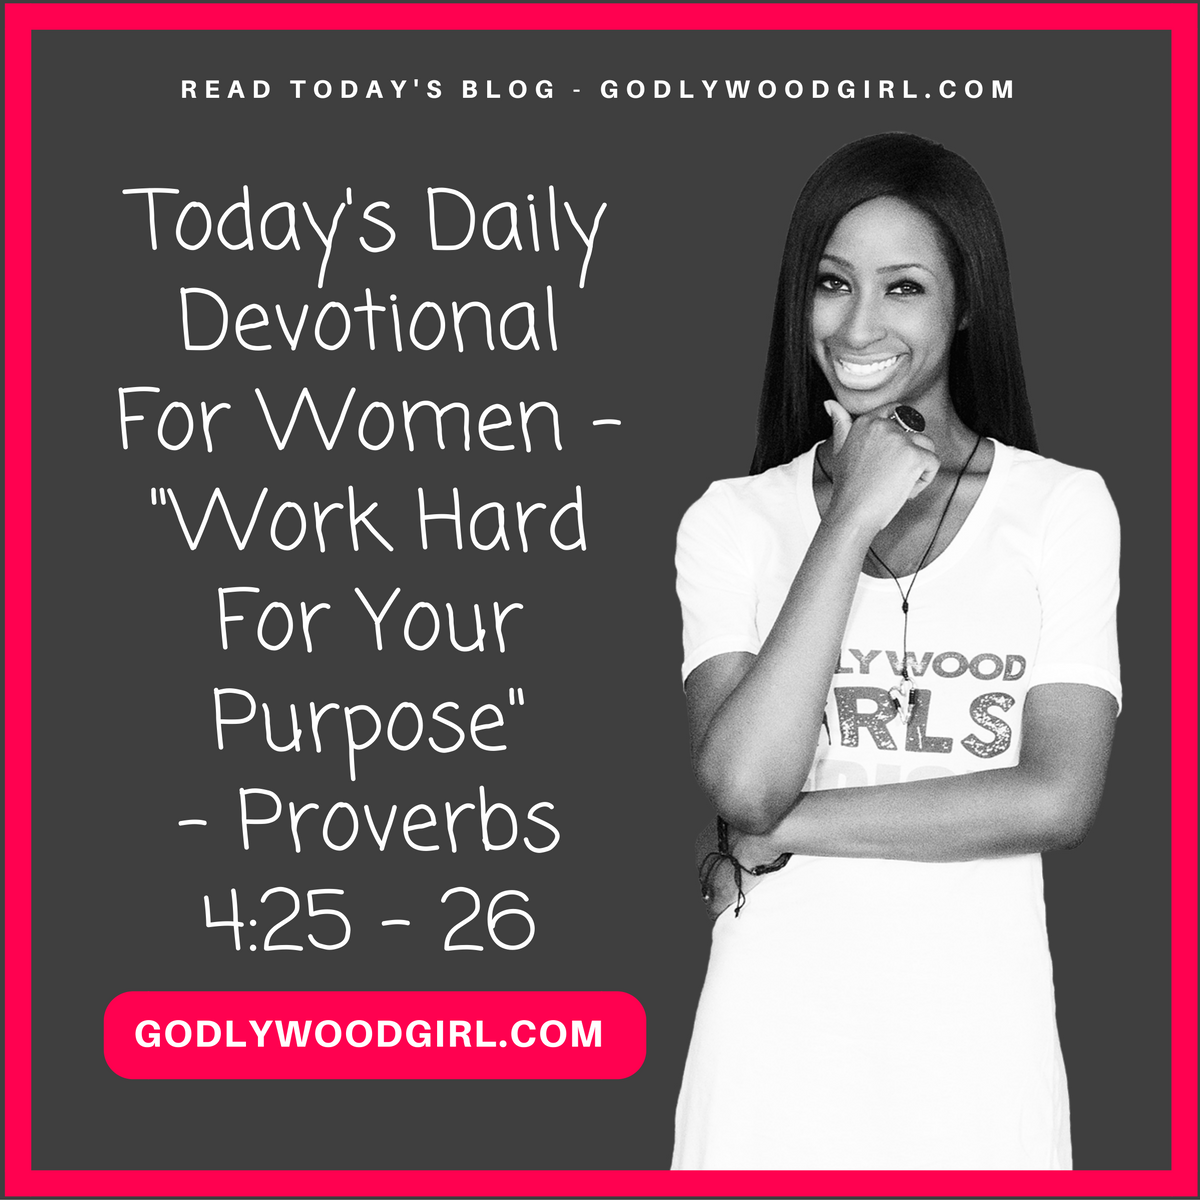 Today's Daily Devotional For Women - Work Hard For Your Purpose